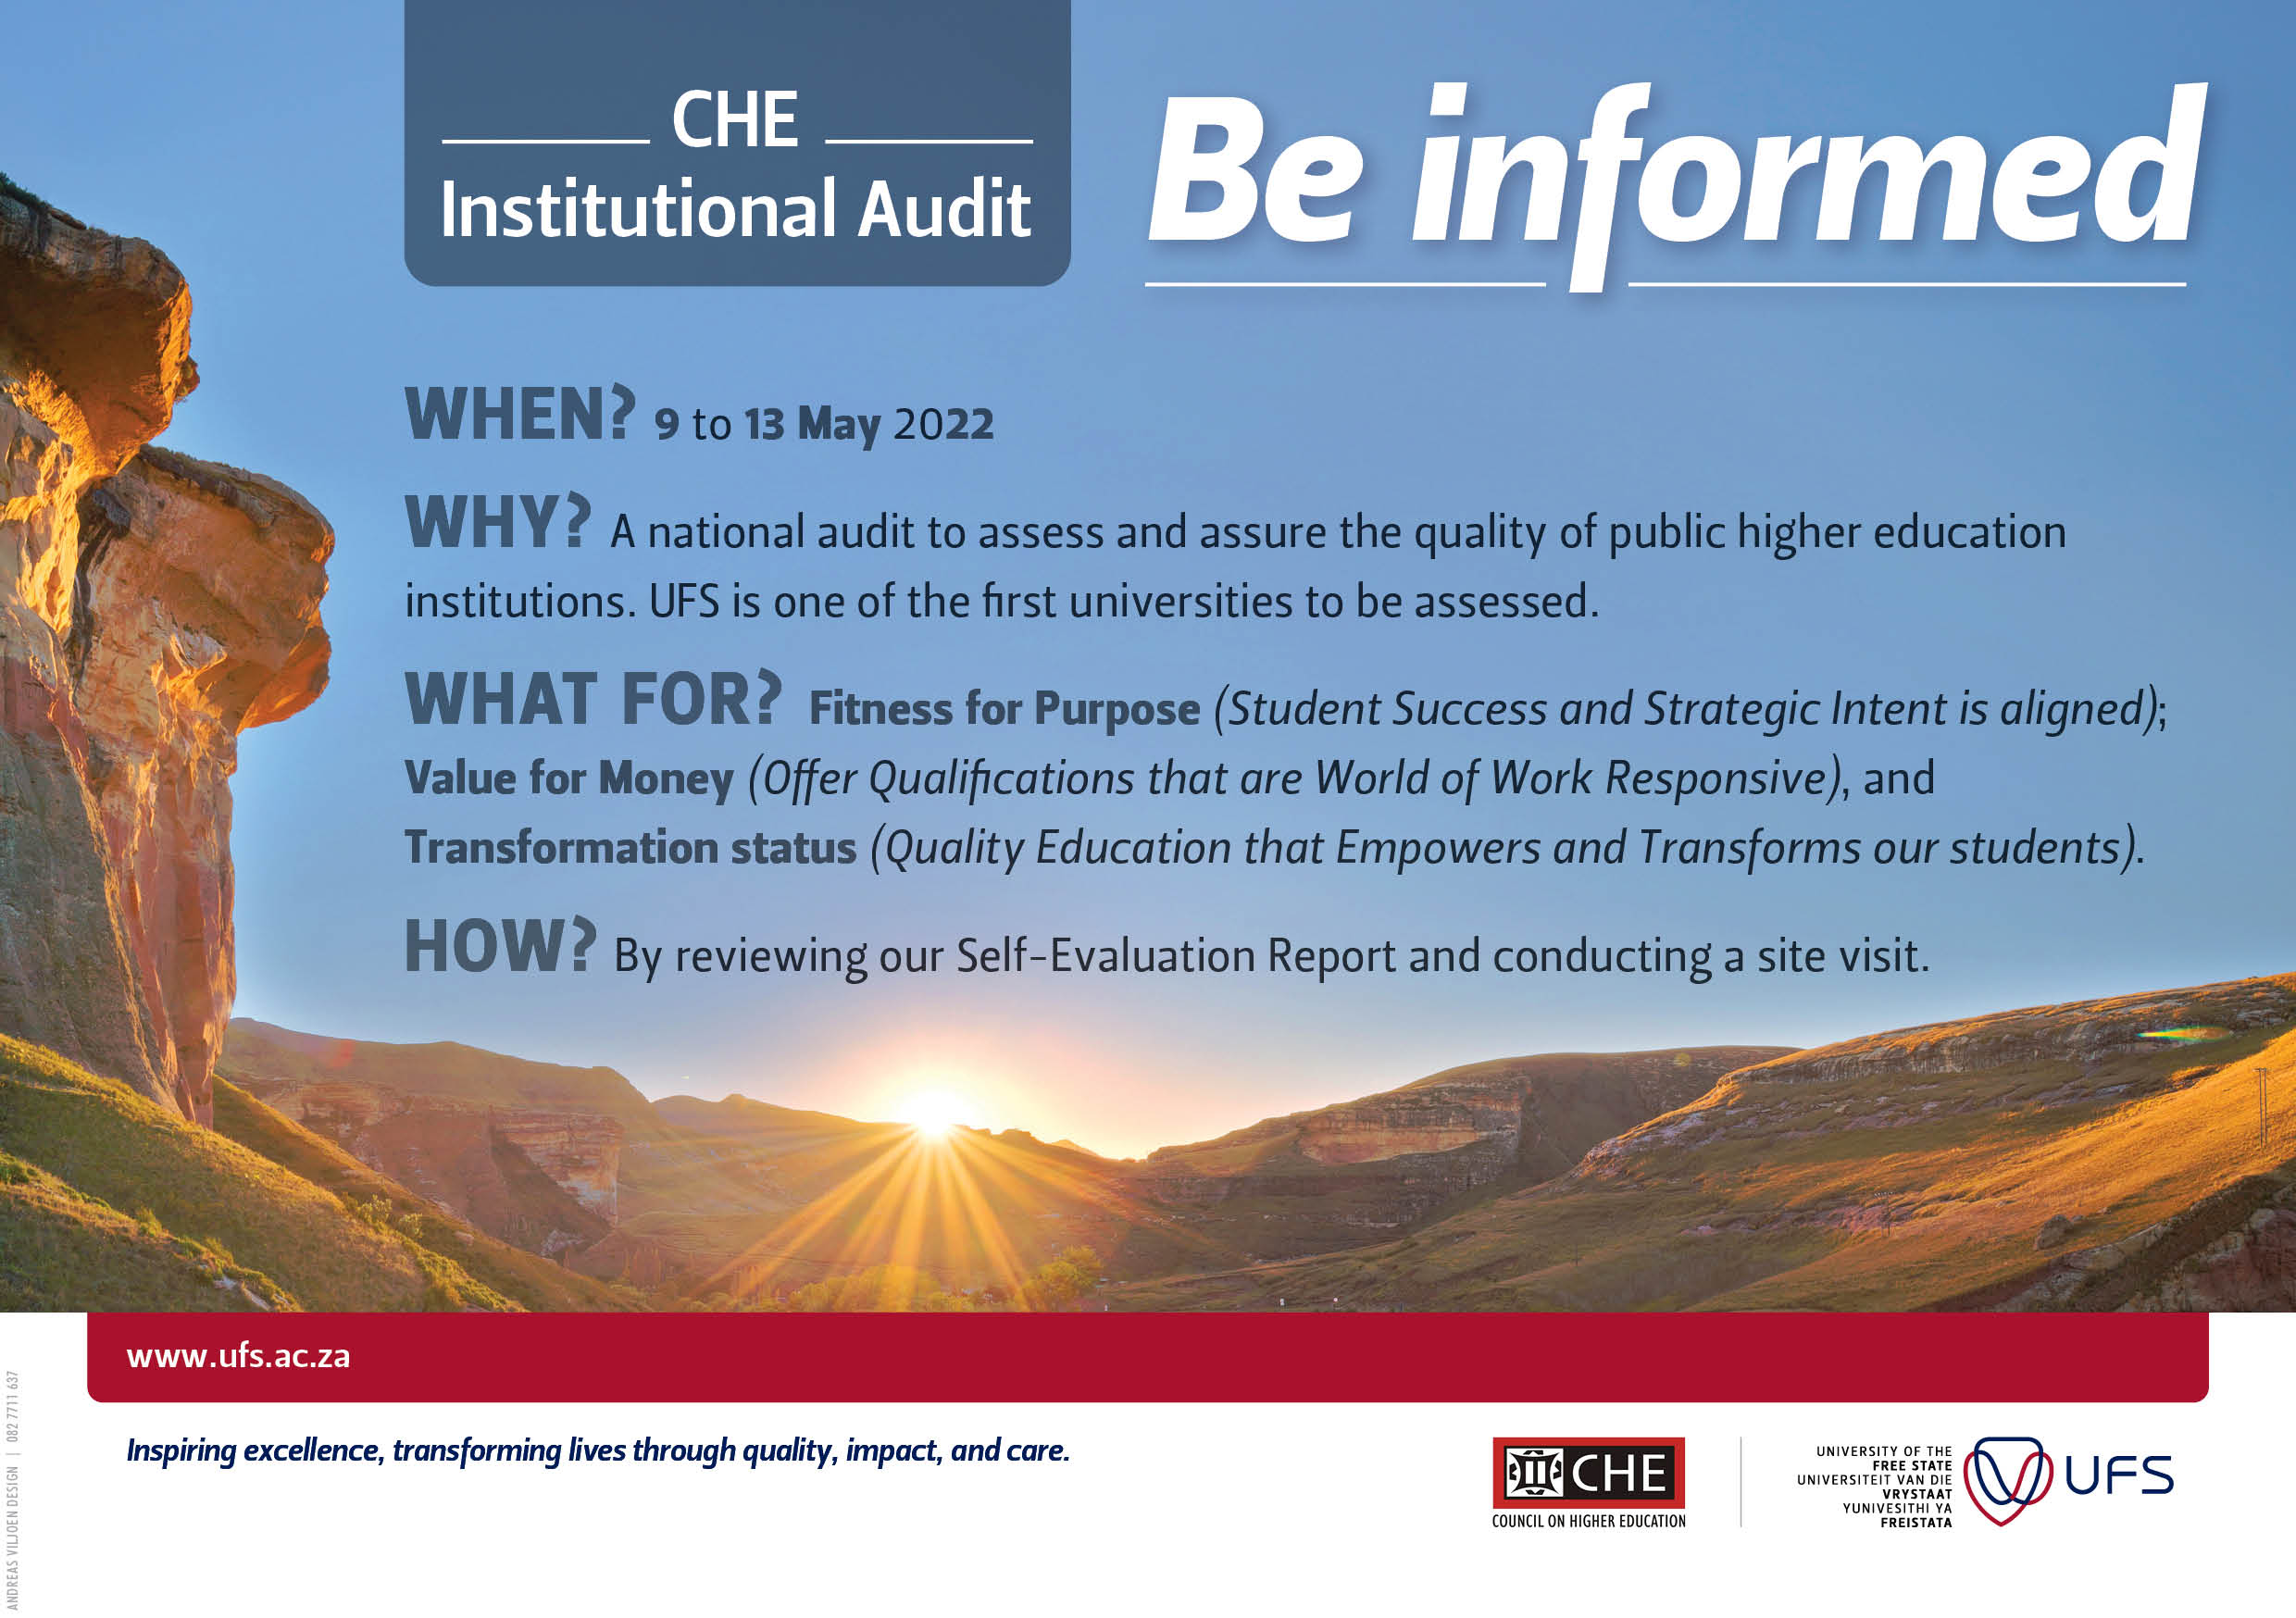 More about the institutional audit